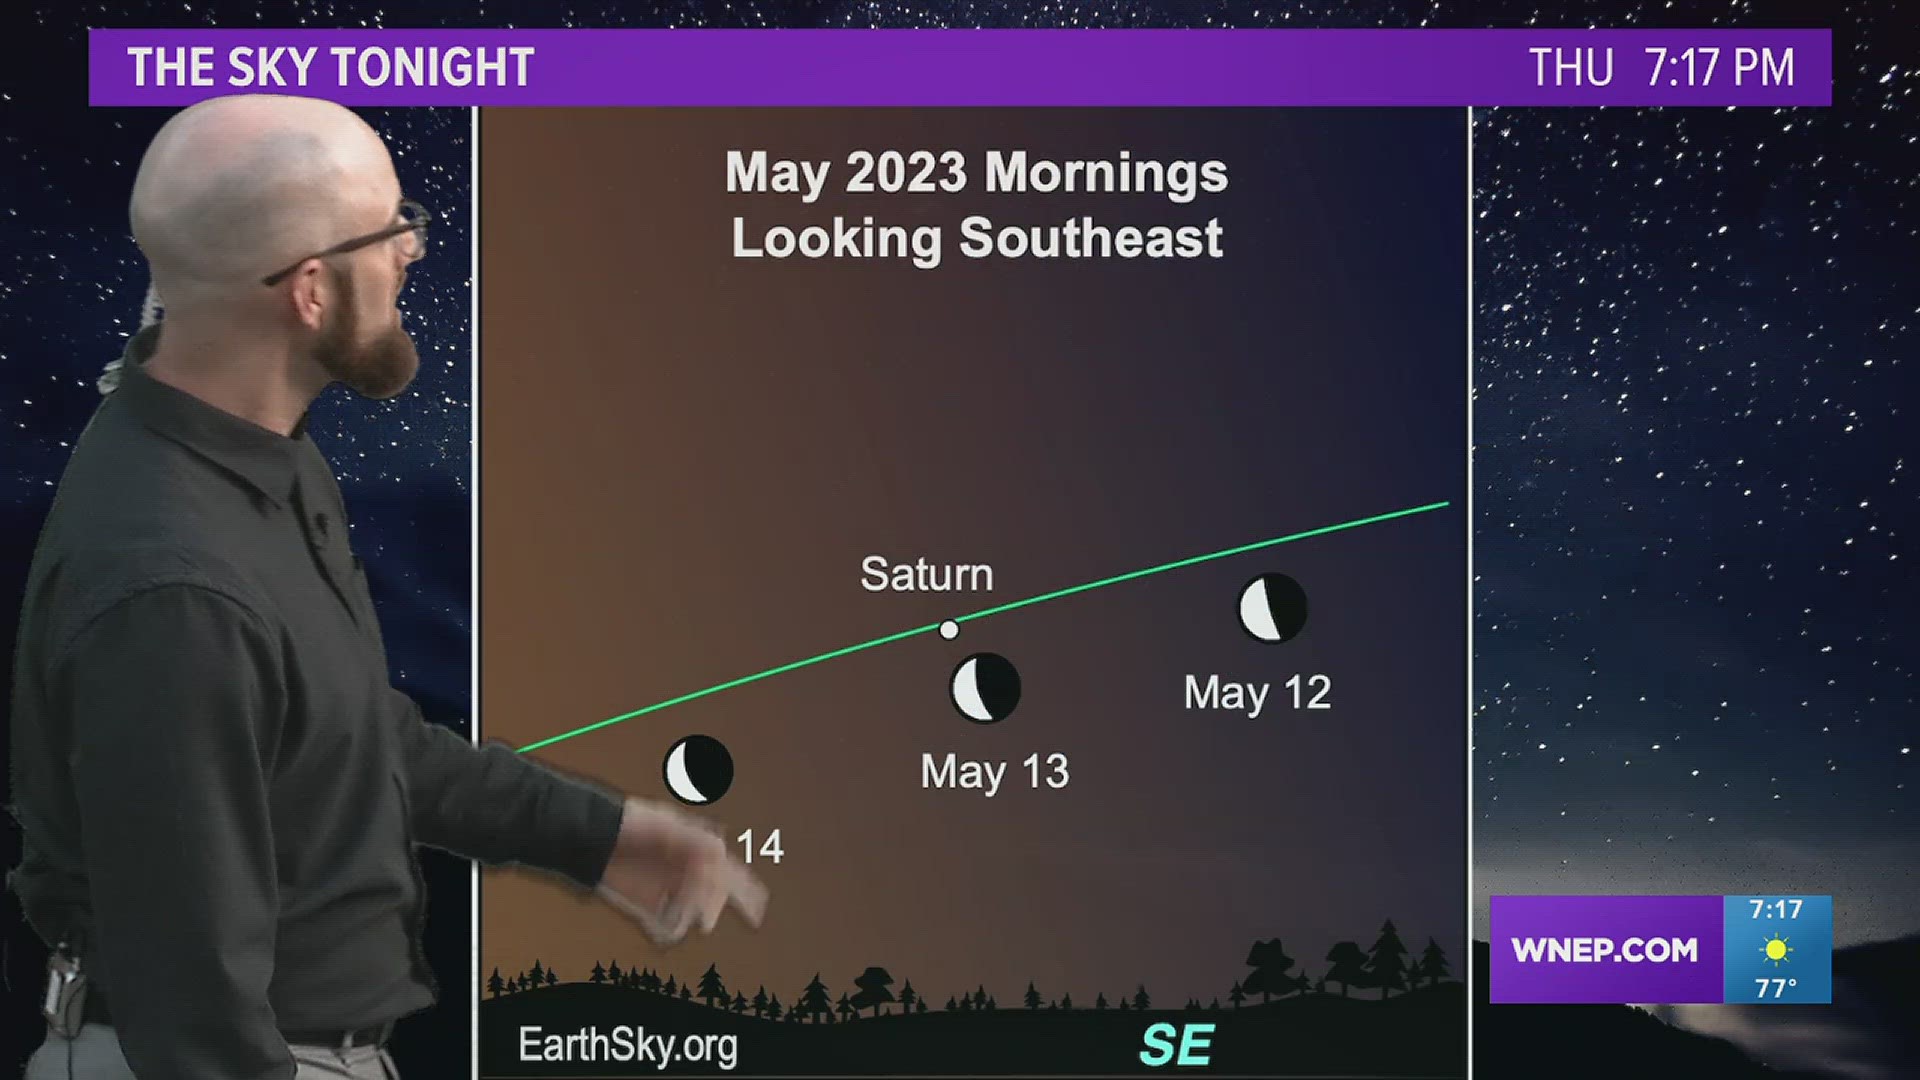 Some things to look for in the early morning sky Friday